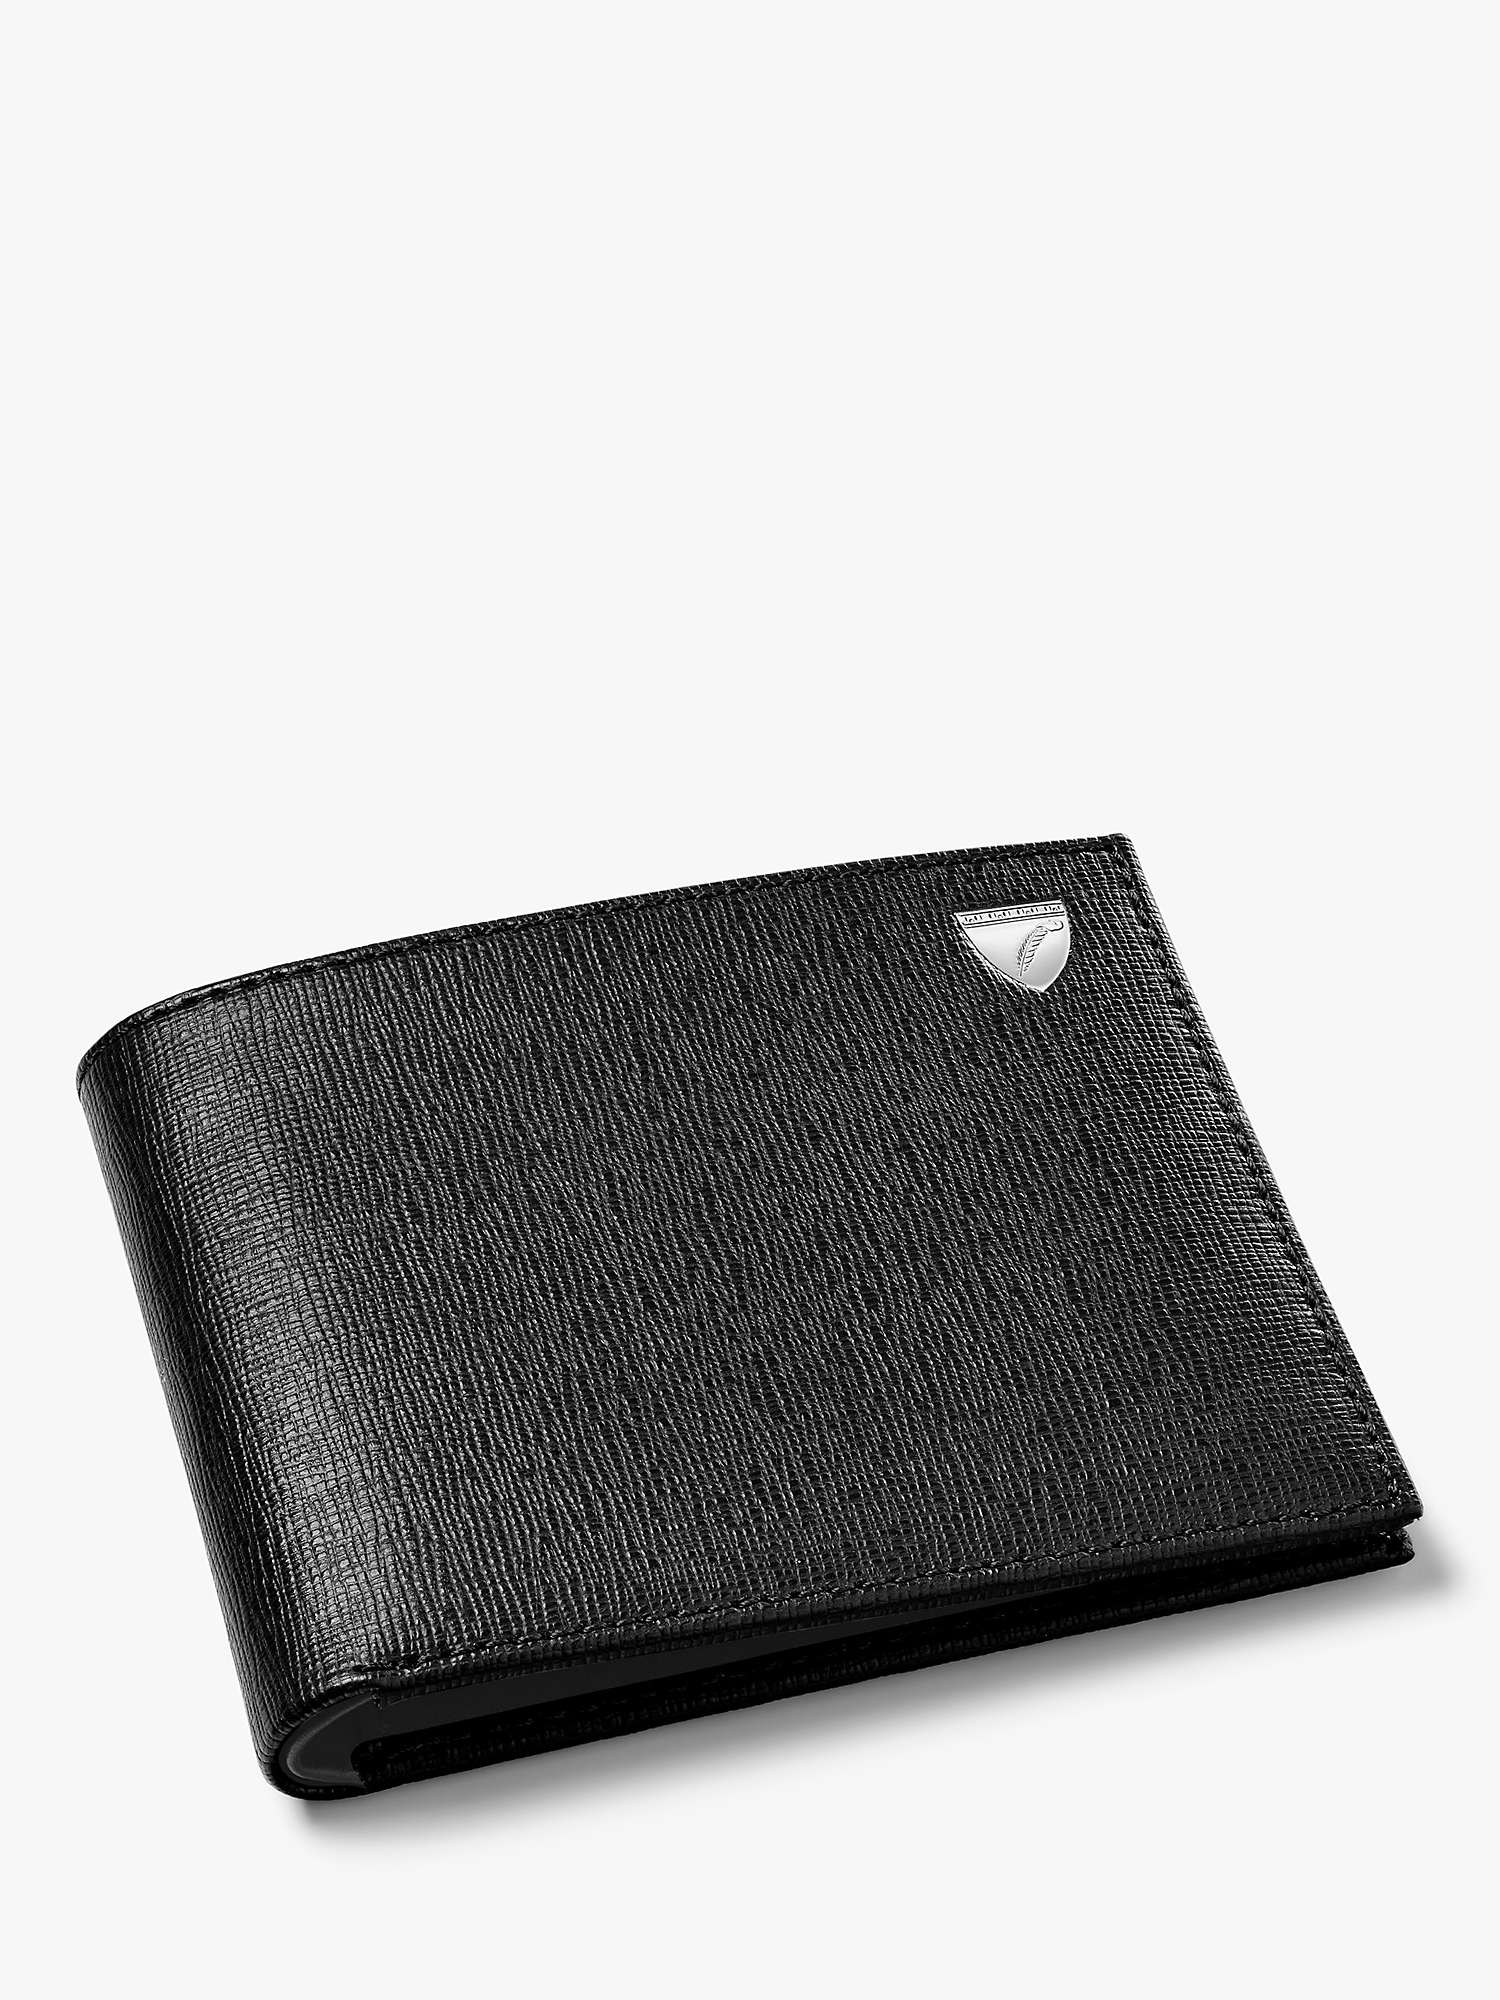 Buy Aspinal of London 8 Card Billfold Saffiano Leather Wallet Online at johnlewis.com